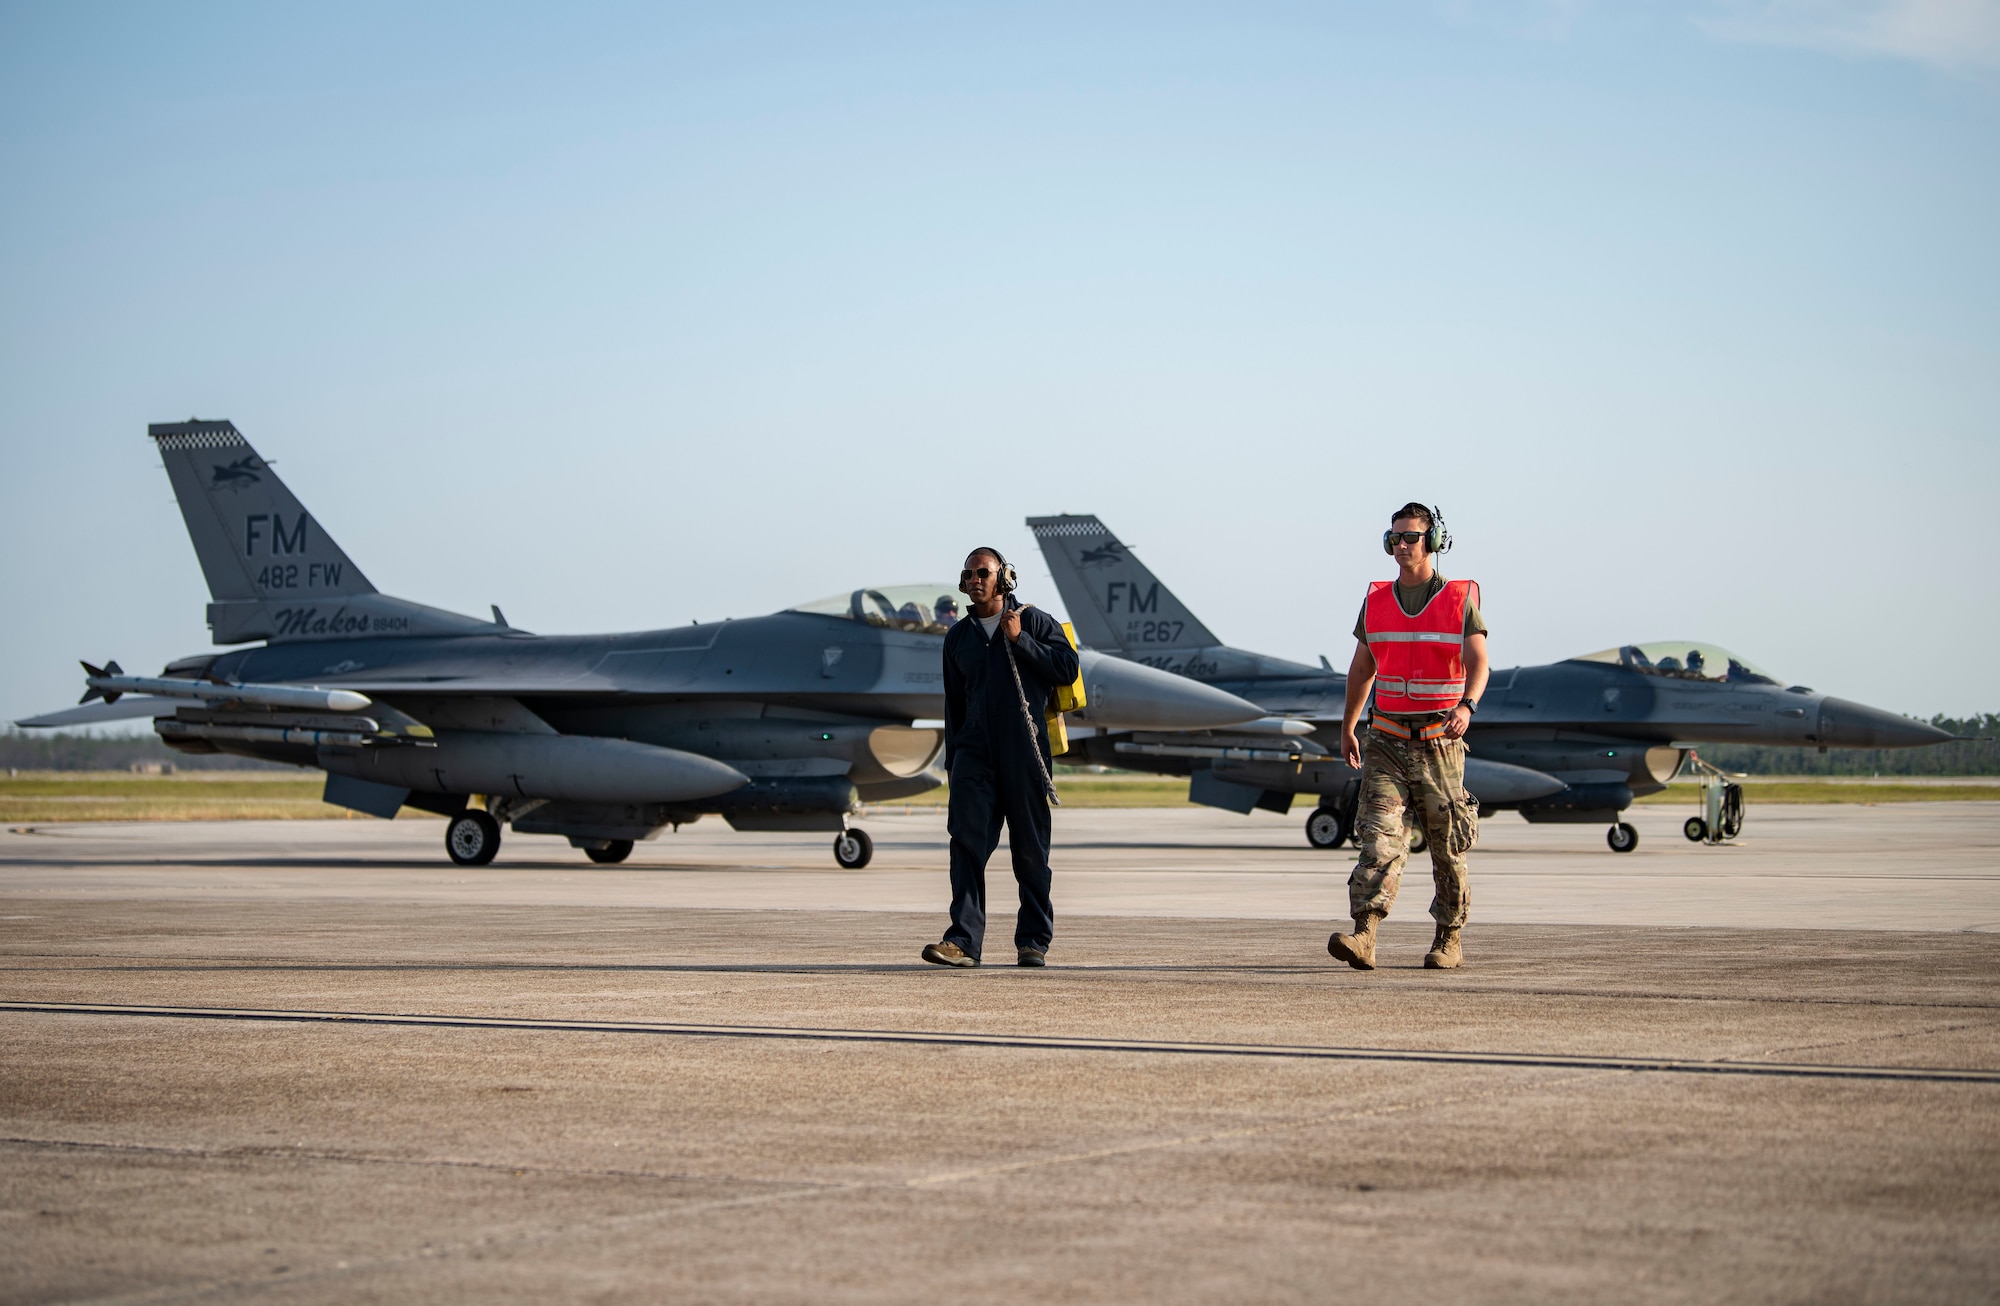 Two Airmen walk on the flight line with two aircraft behind them.